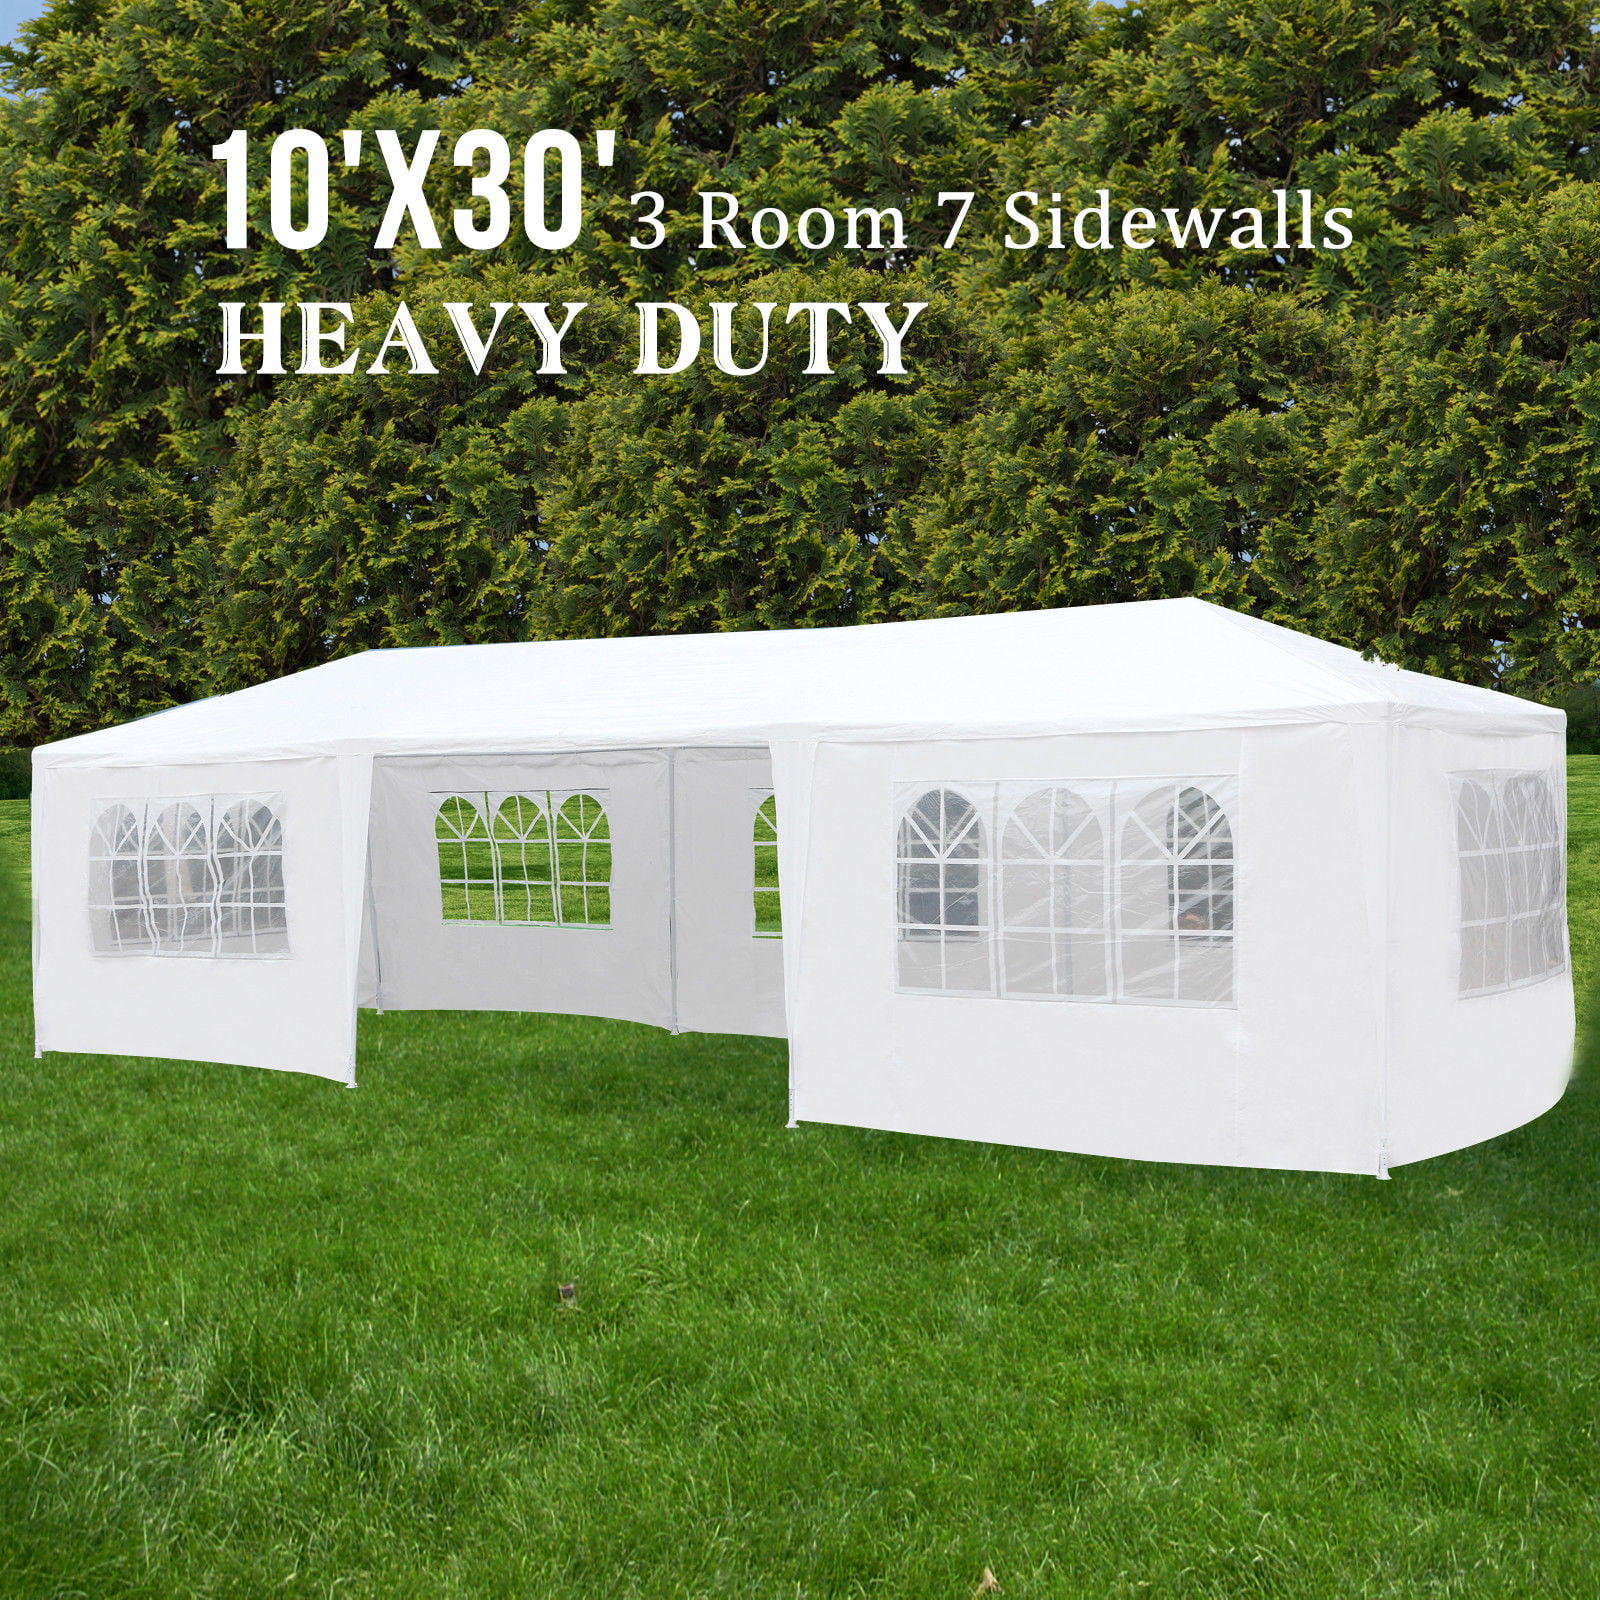 Details about   10'x30' Canopy Party Wedding Tent Gazebo Pavilion w/8 Side Walls Outdoor White